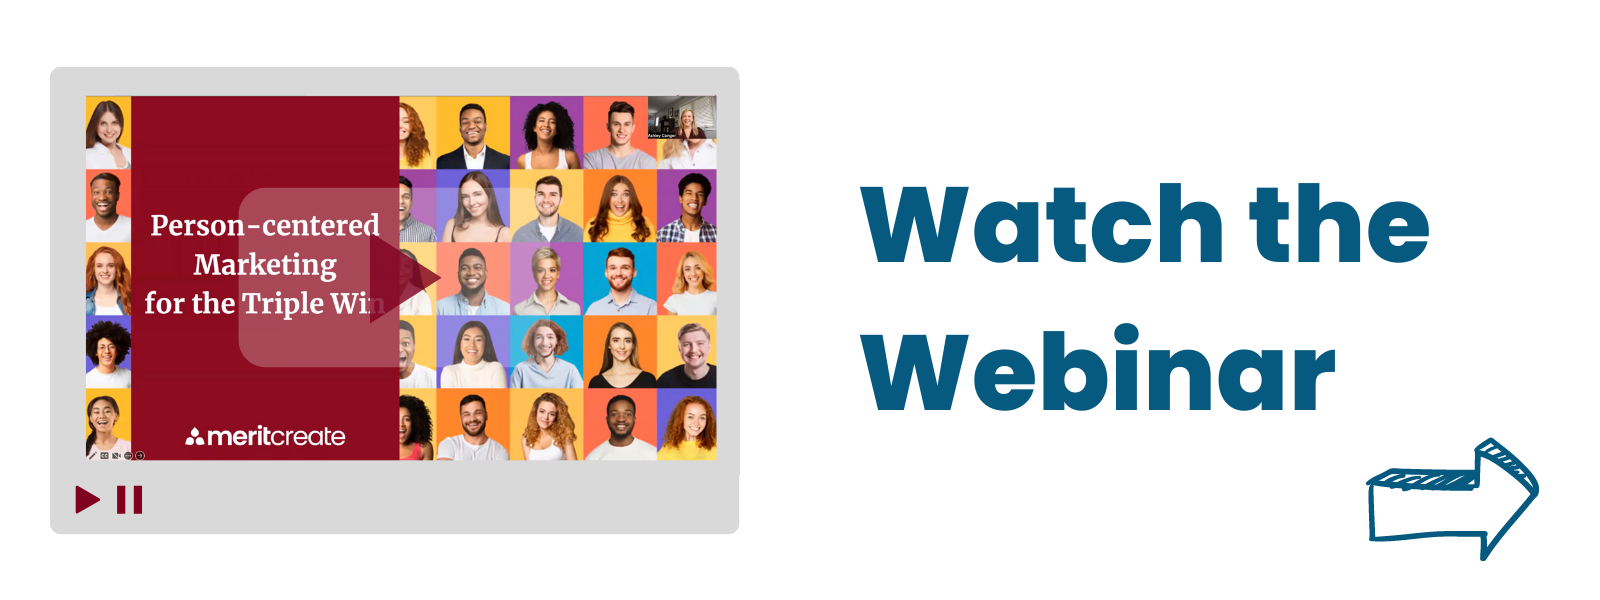 Watch the webinar, Person-centered Marketing for the Triple Win